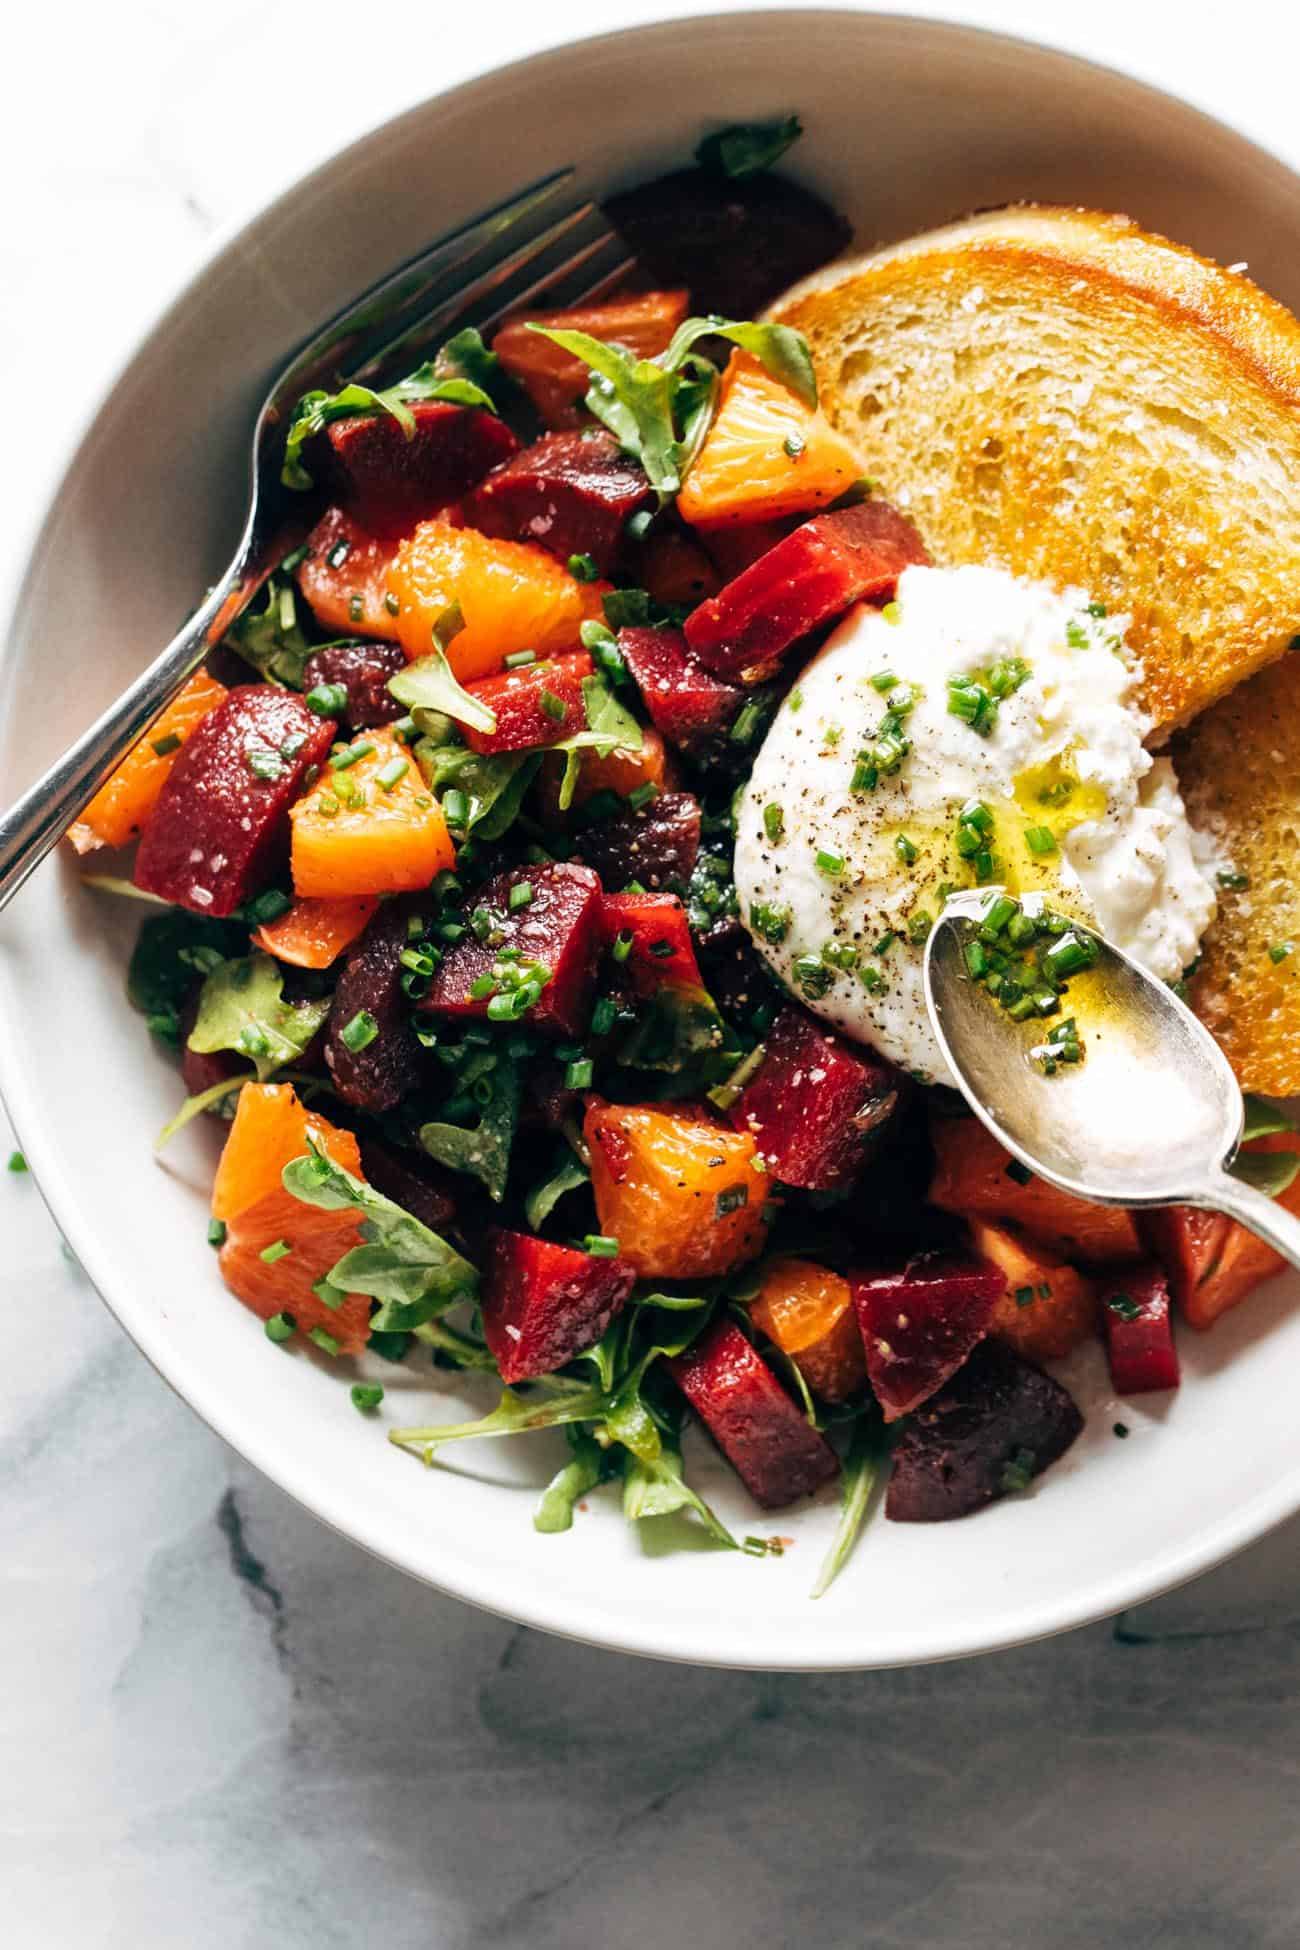 Beet and burrata salad in a bowl with fried bread